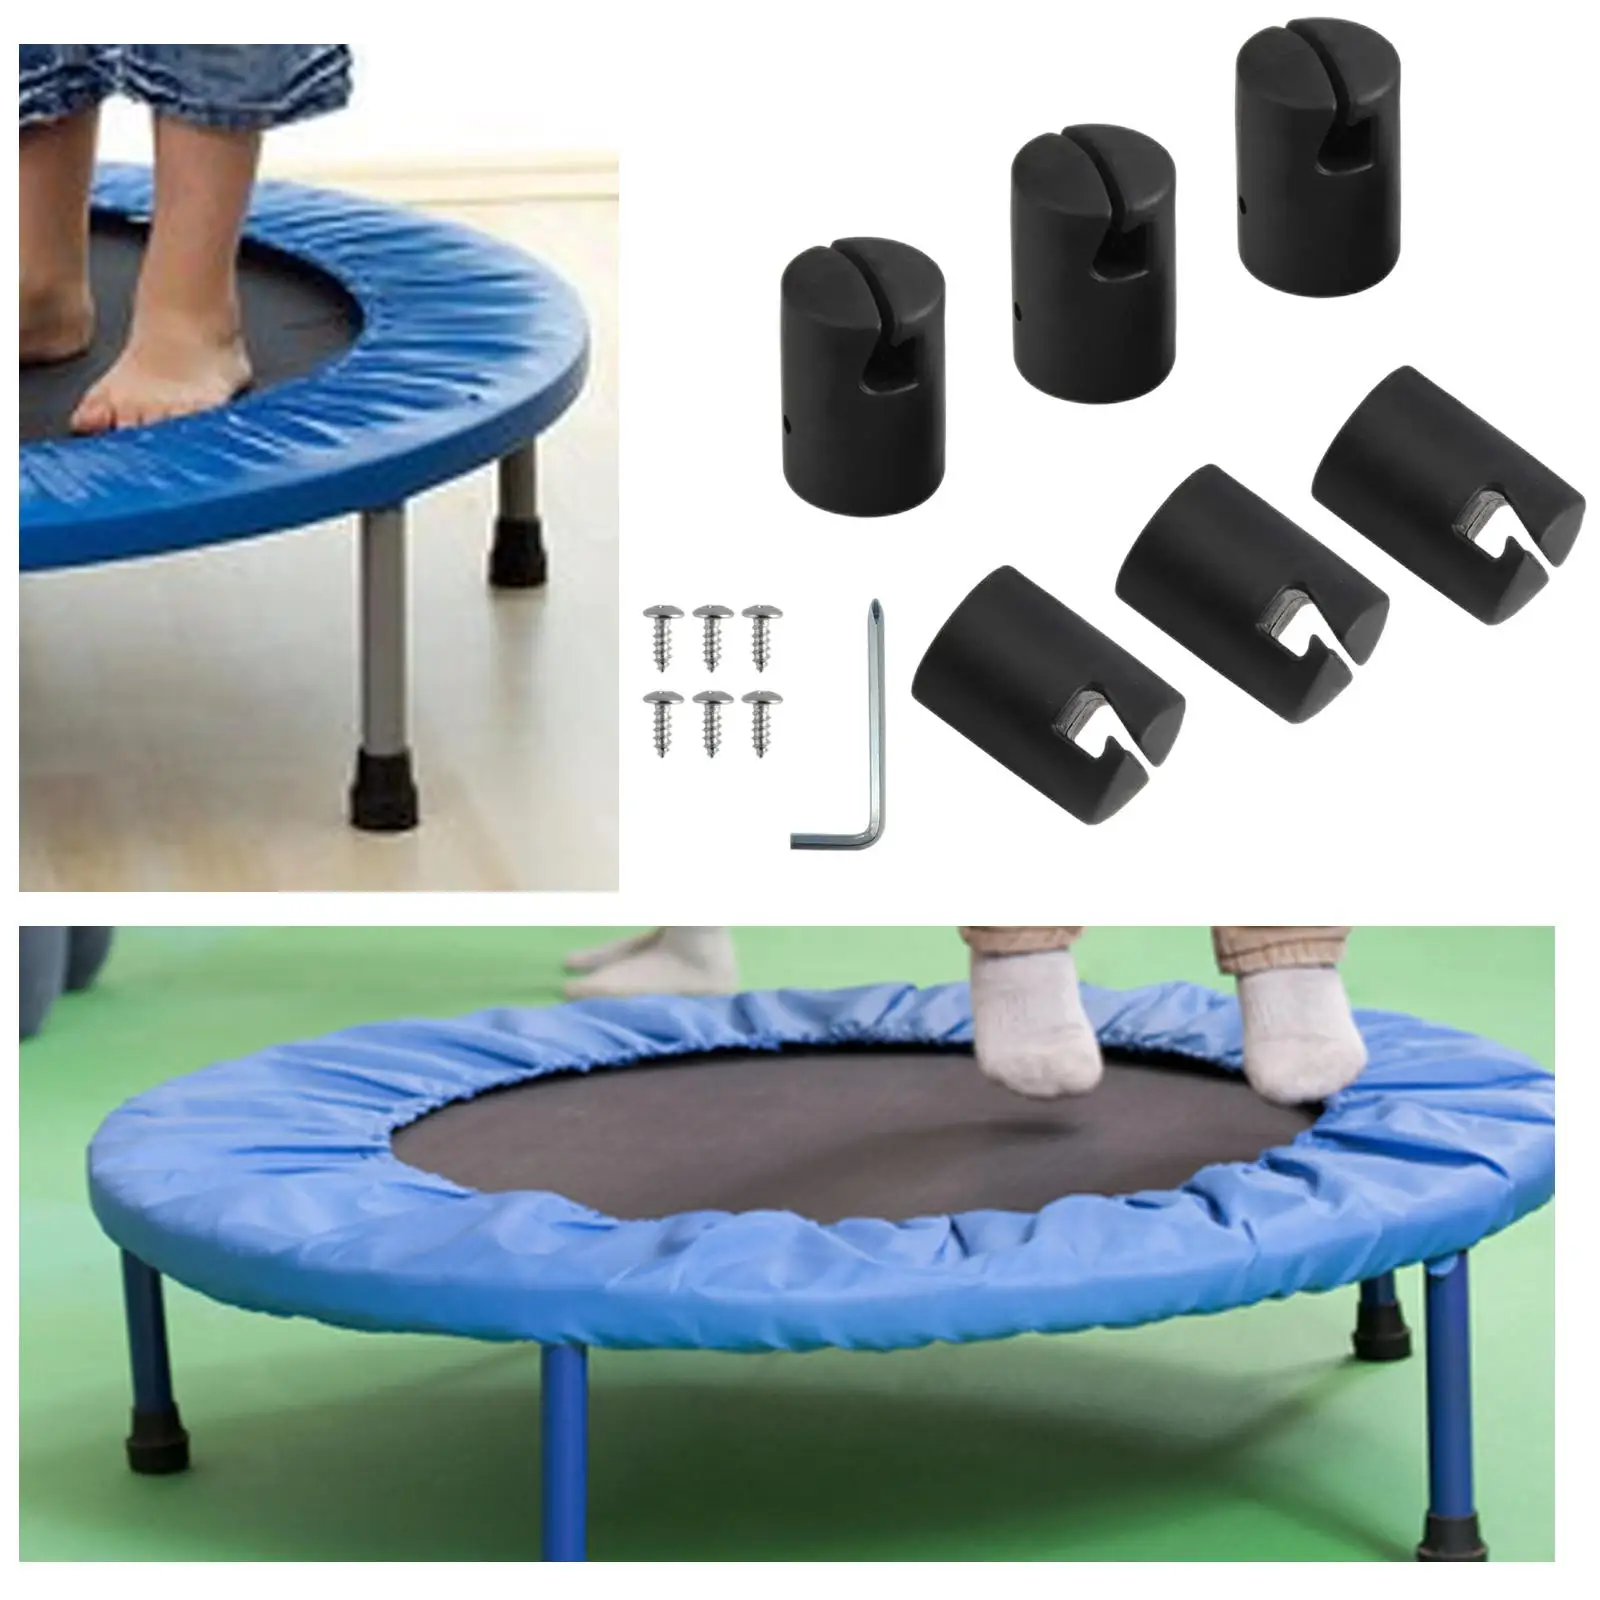 Trampoline Enclosure Pole CAPS with Screws Wrenches for Safety Trampoline Parts Supply